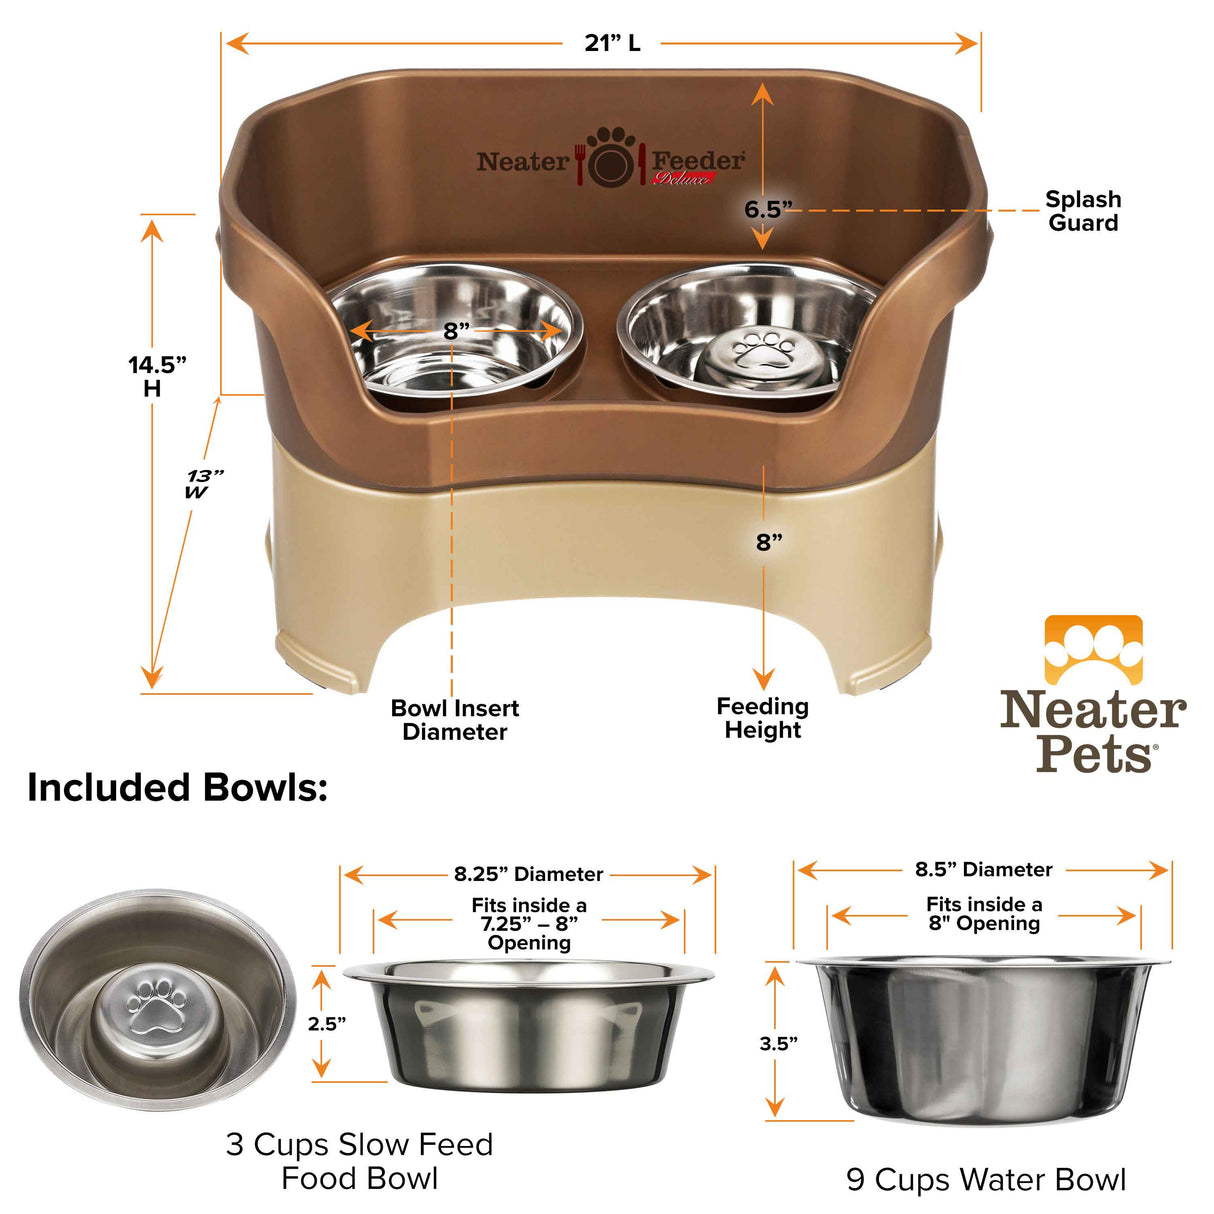 dimensions of the Bronze large DELUXE Neater Feeder with Stainless Steel Slow Feed Bowl